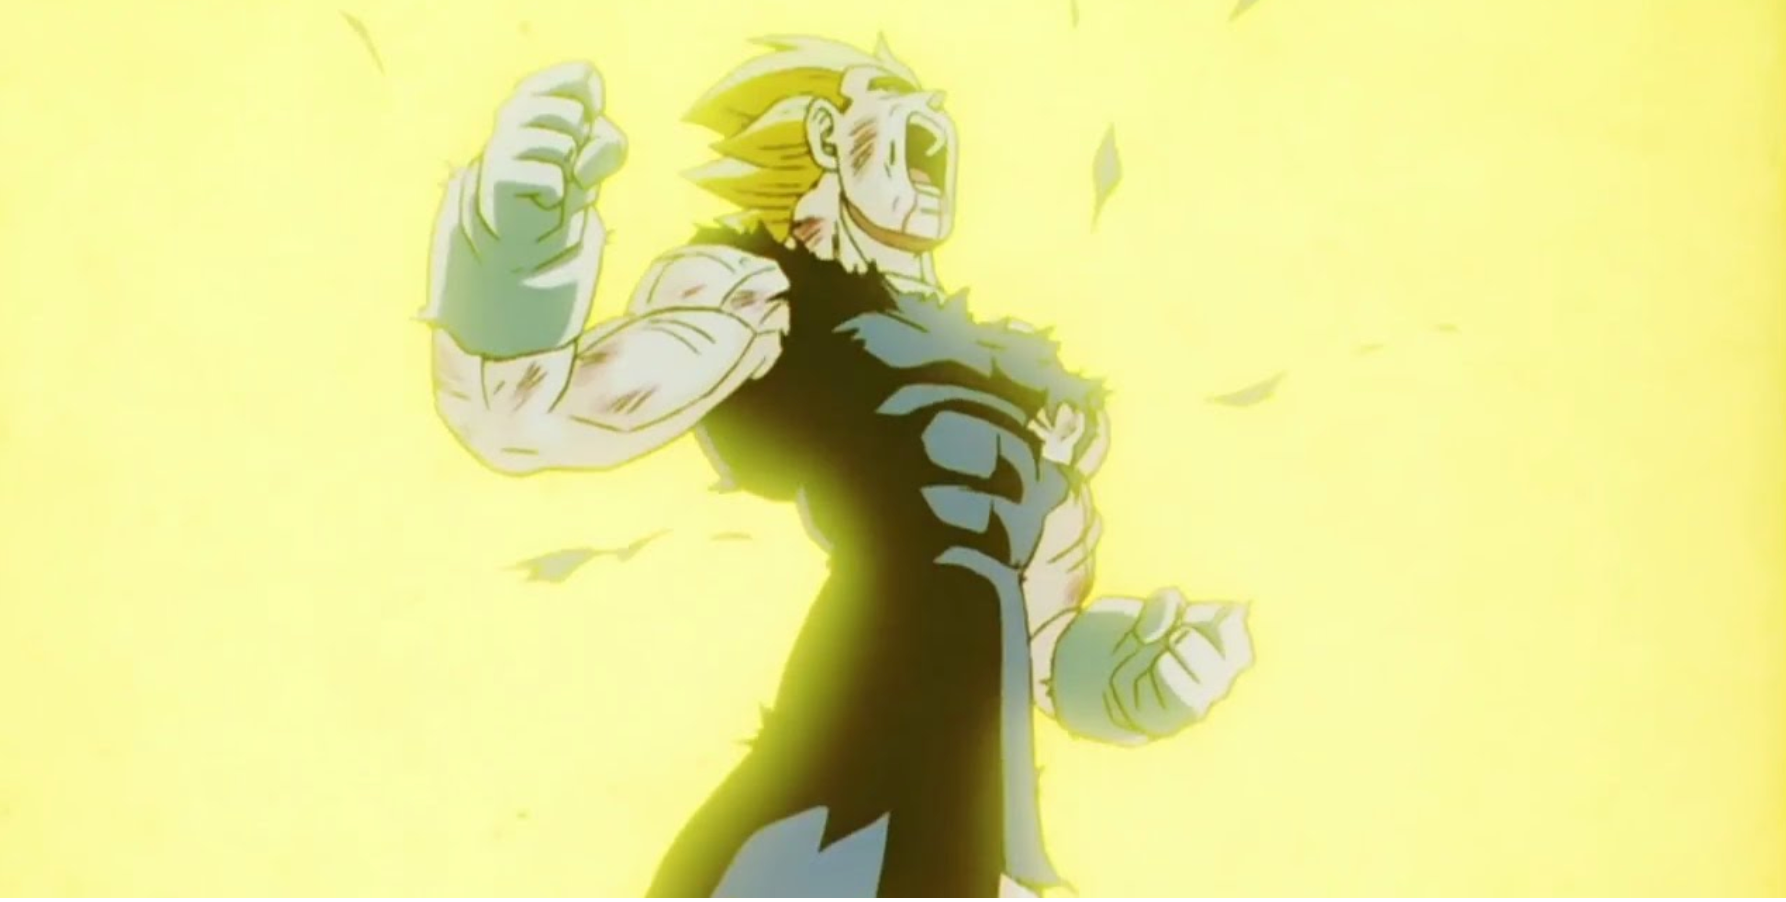 Vegeta's Best Fights in DBZ and Dragon Ball Super, Ranked